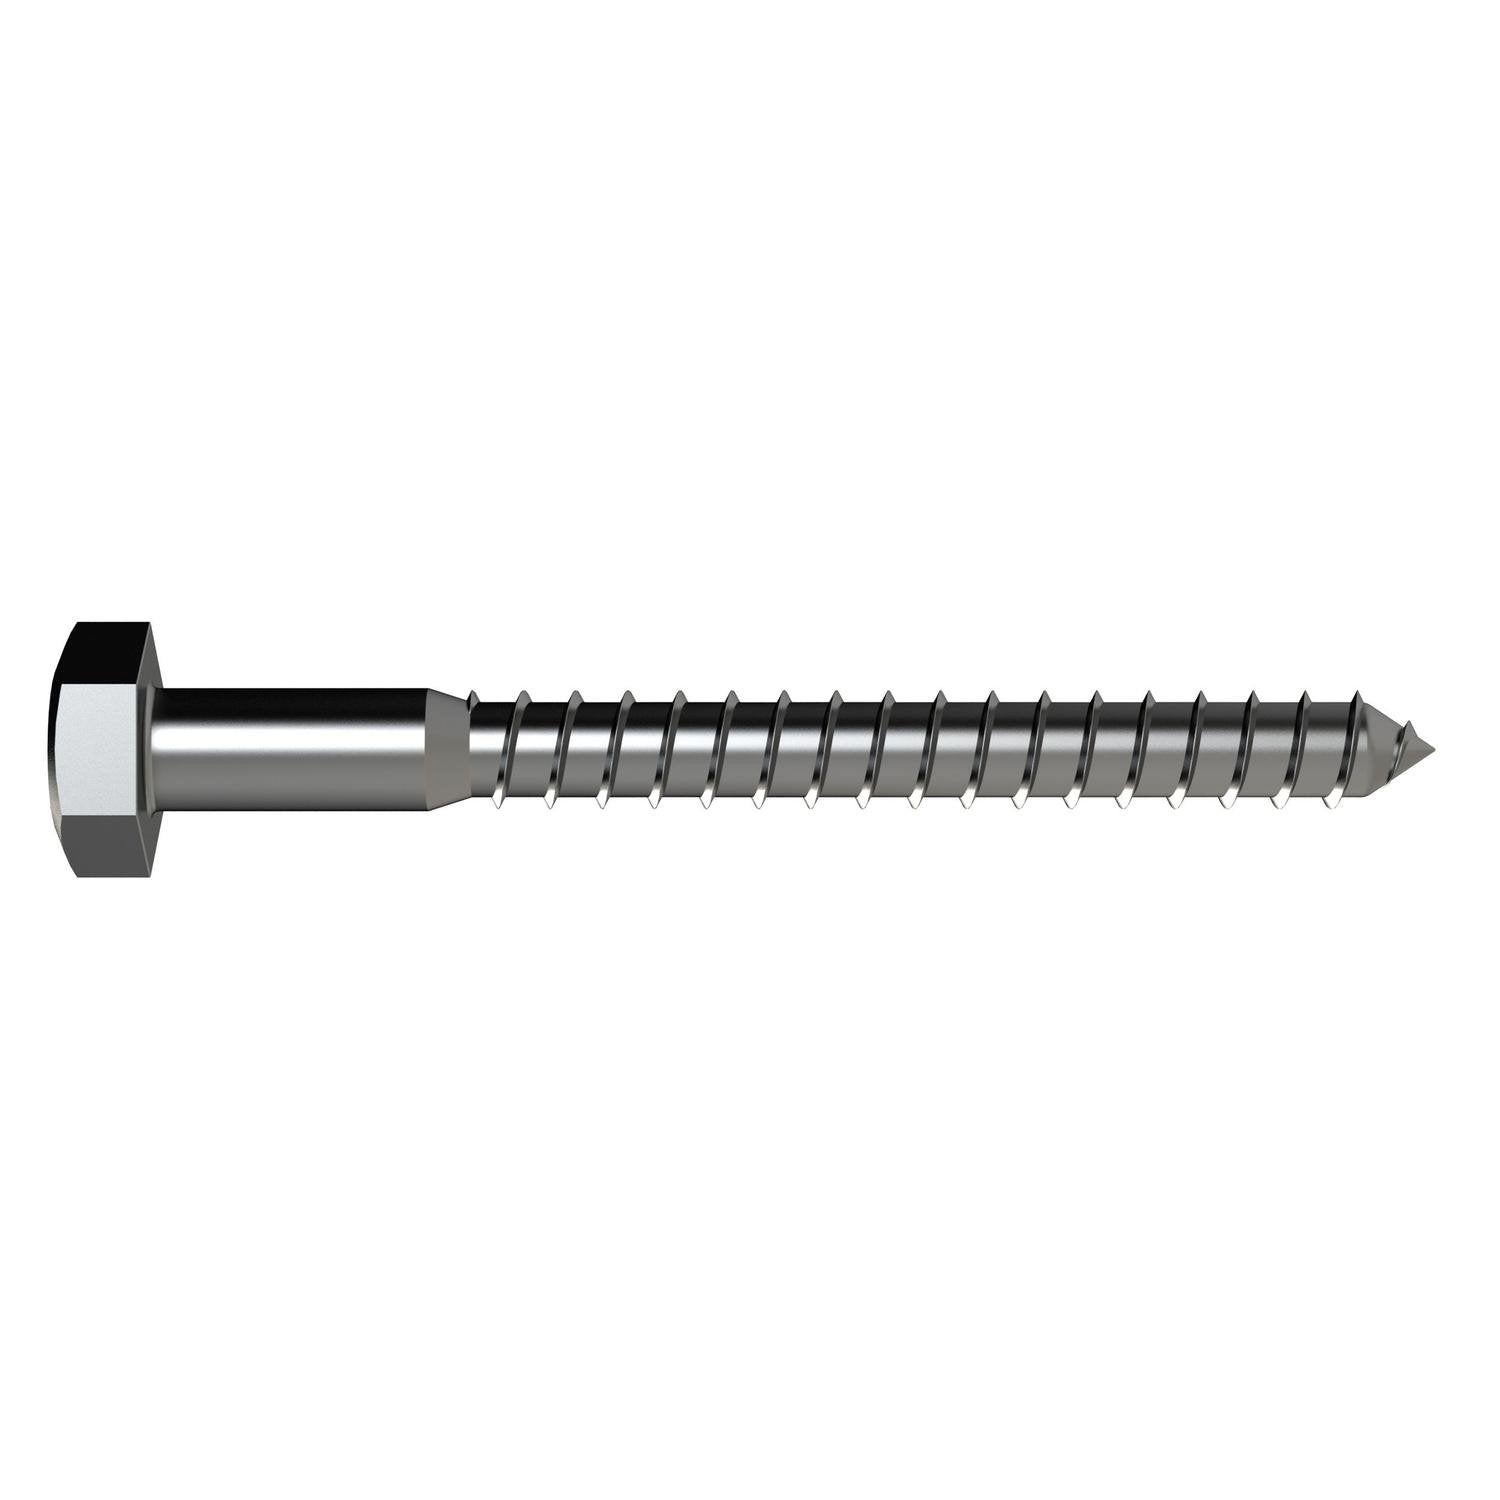 Bremick Coach Screw M12 X 180Mm Stainless Steel